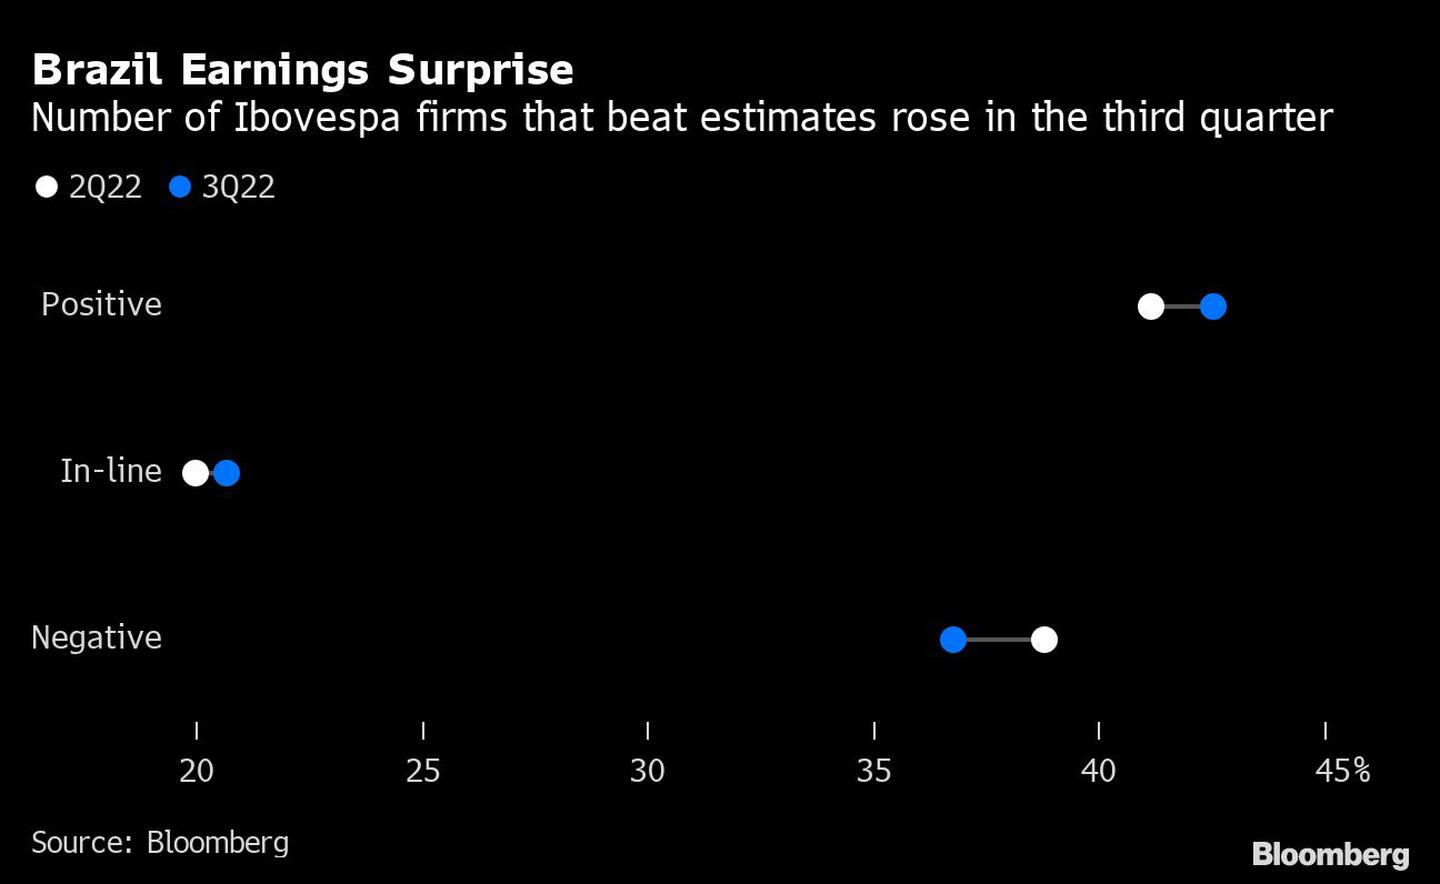 Brazil Earnings Surprise | Number of Ibovespa firms that beat estimates rose in the third quarterdfd